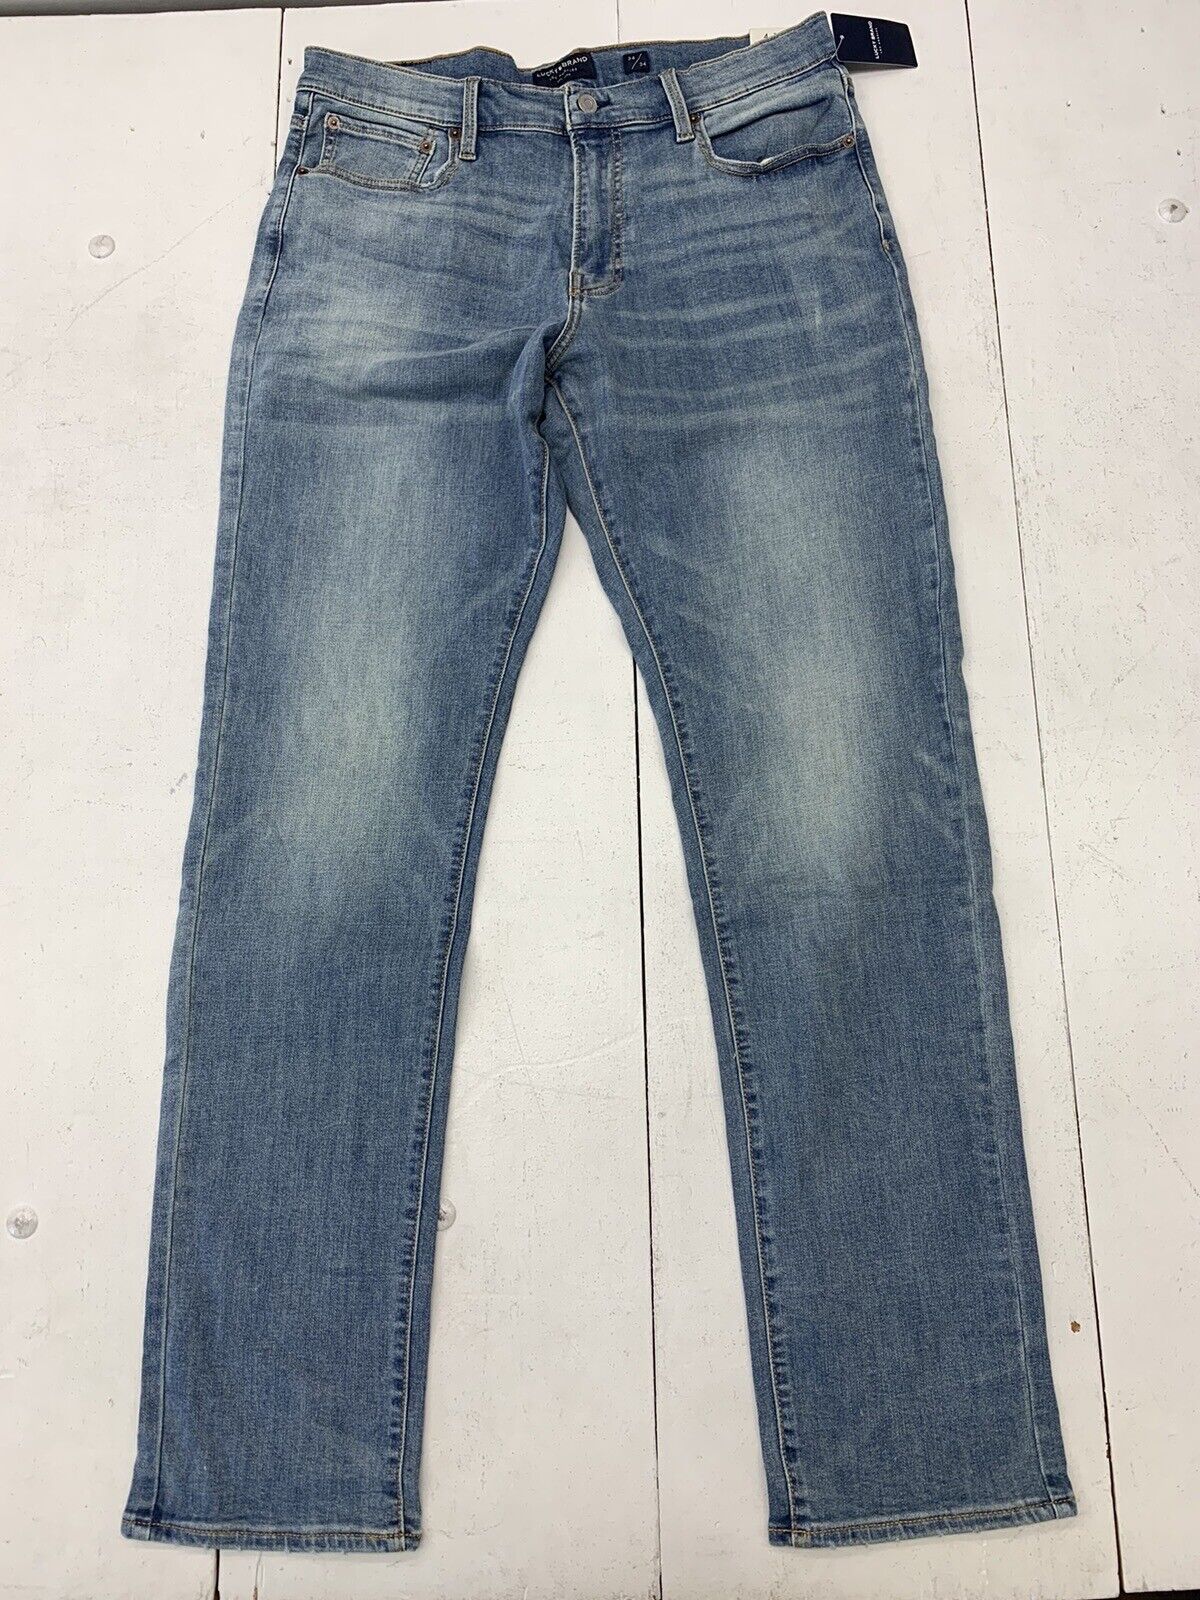 Lucky Brand 410 Athletic Fit Jeans Men’s 34 / 32 Straight Leg Blue